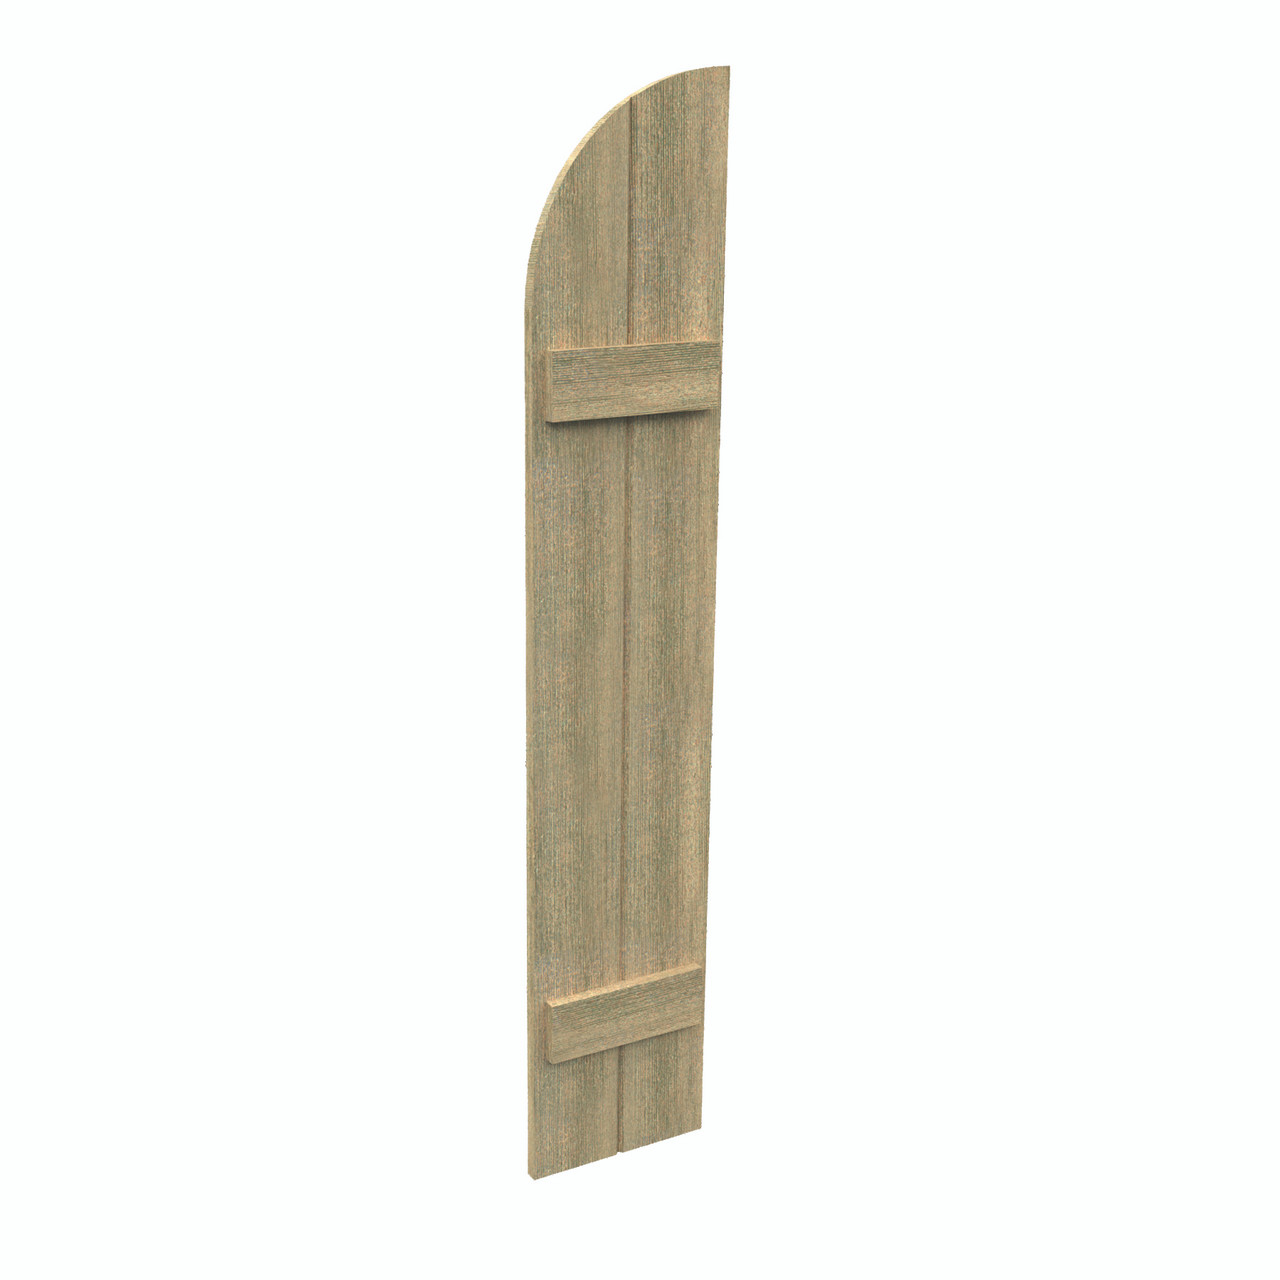 12 inch by 39 inch Quarter Round Shutter with 2-Boards